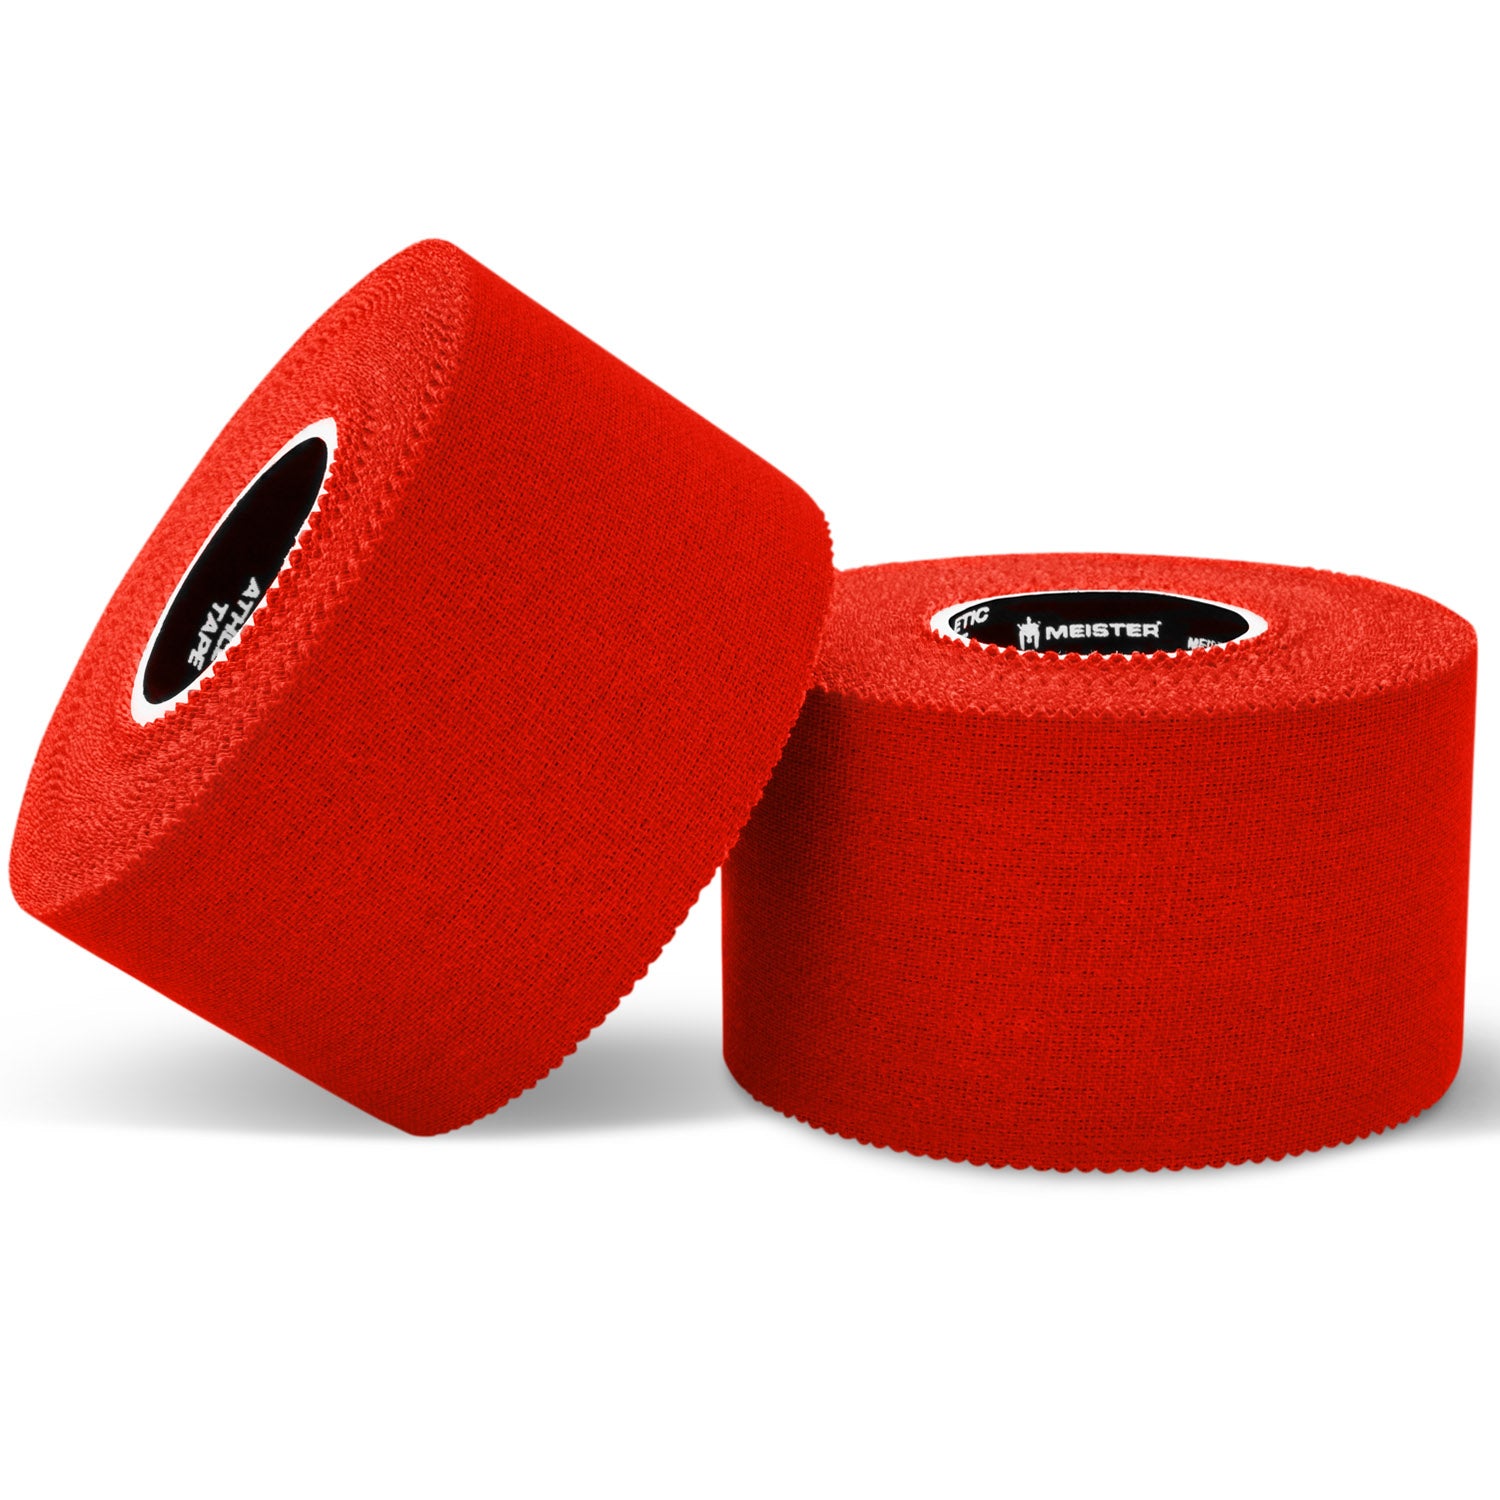 Meister Elite Porous Athletic Tape - 2 Roll Pack - Red